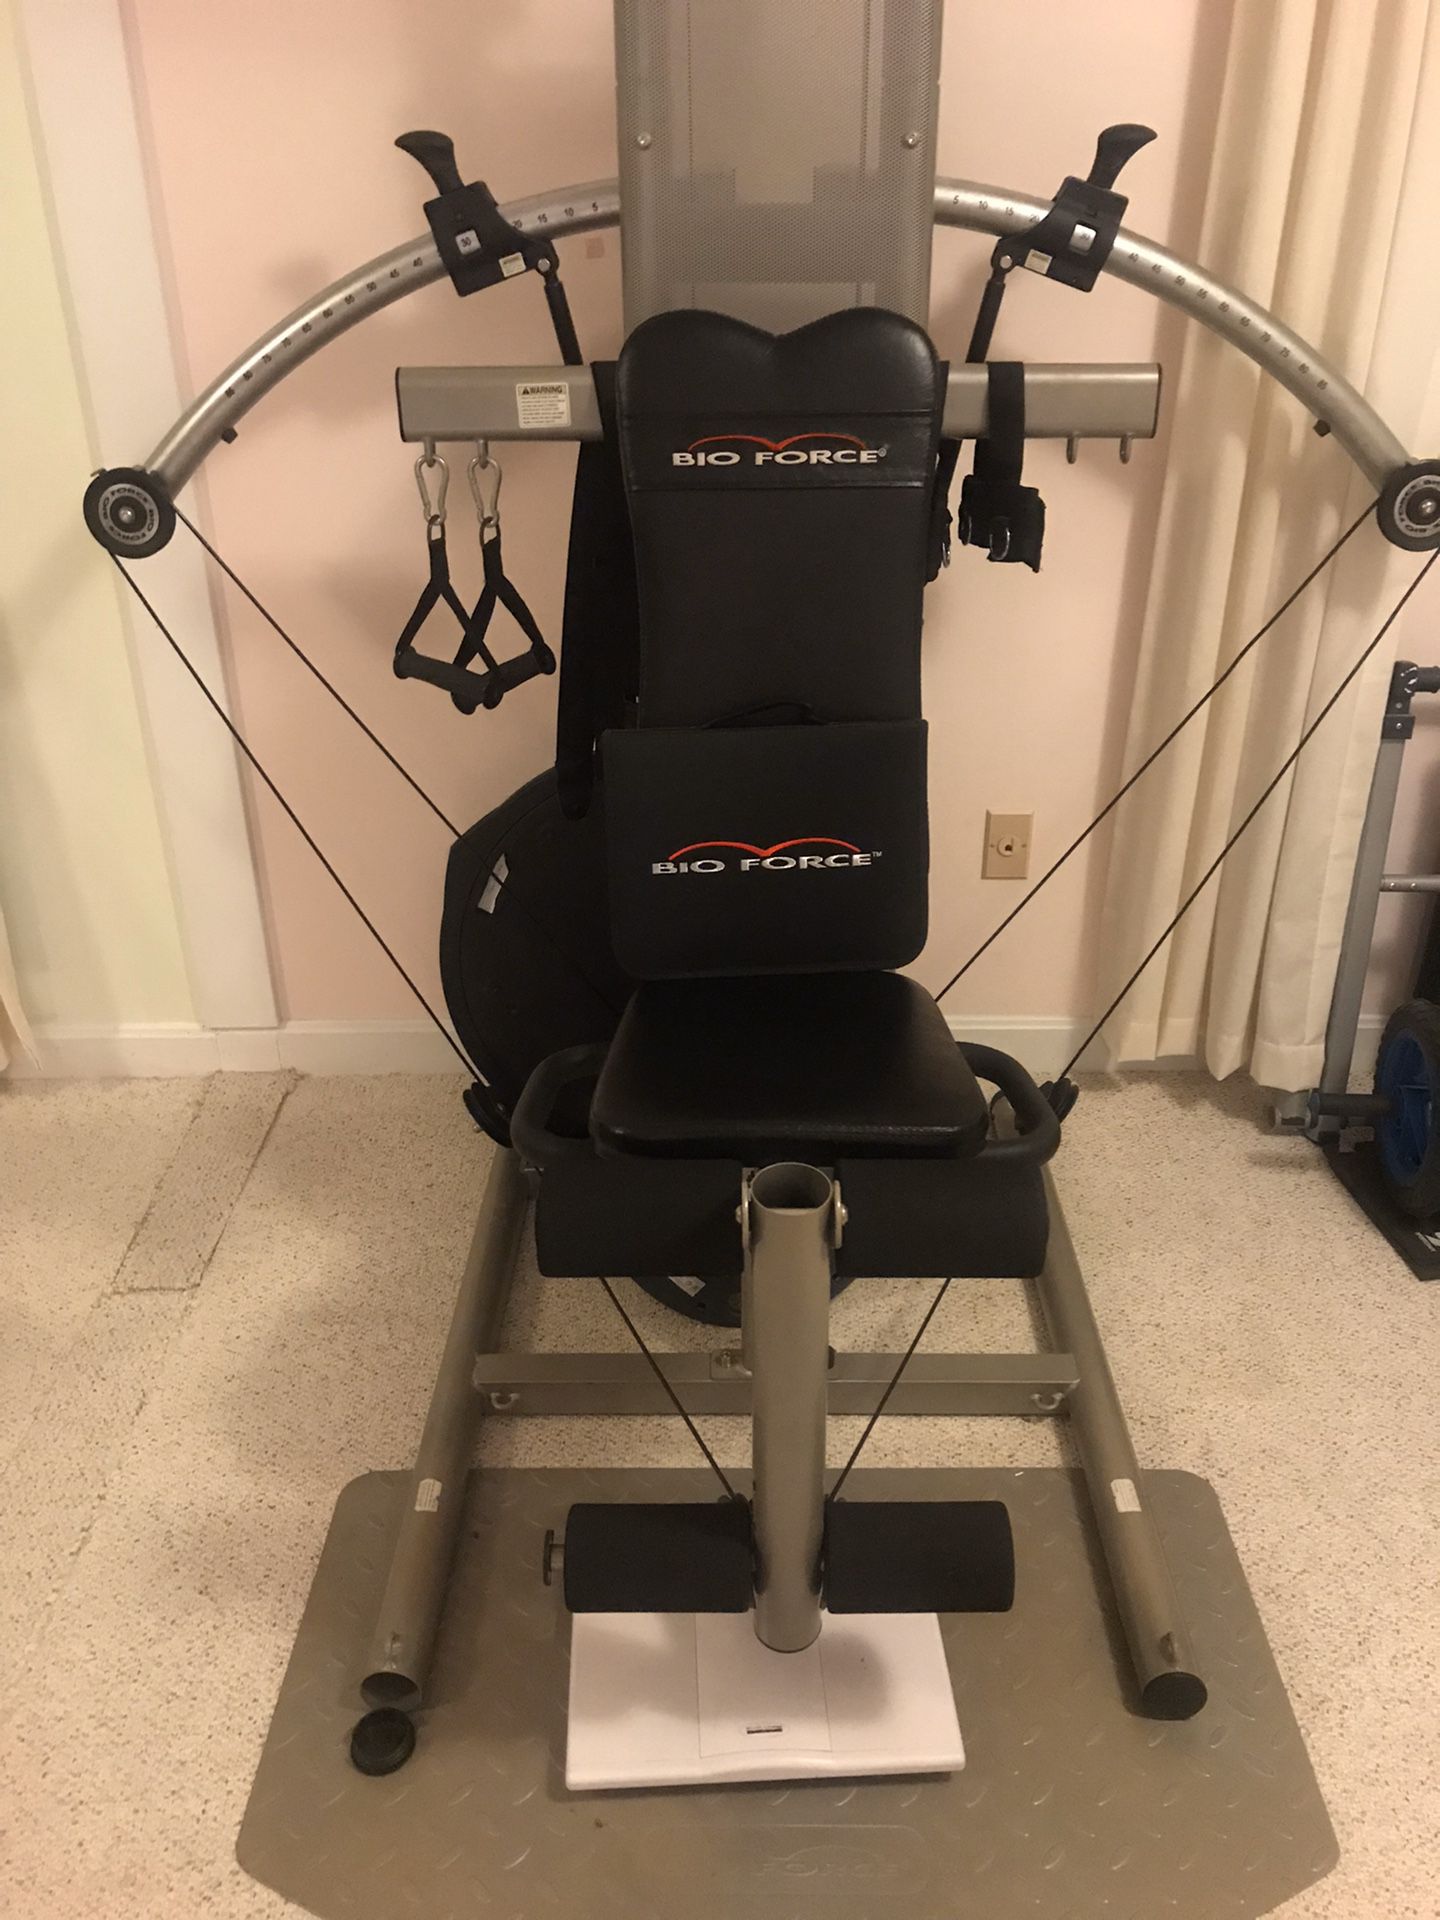 Bio Force Total Body Exercise Equipment